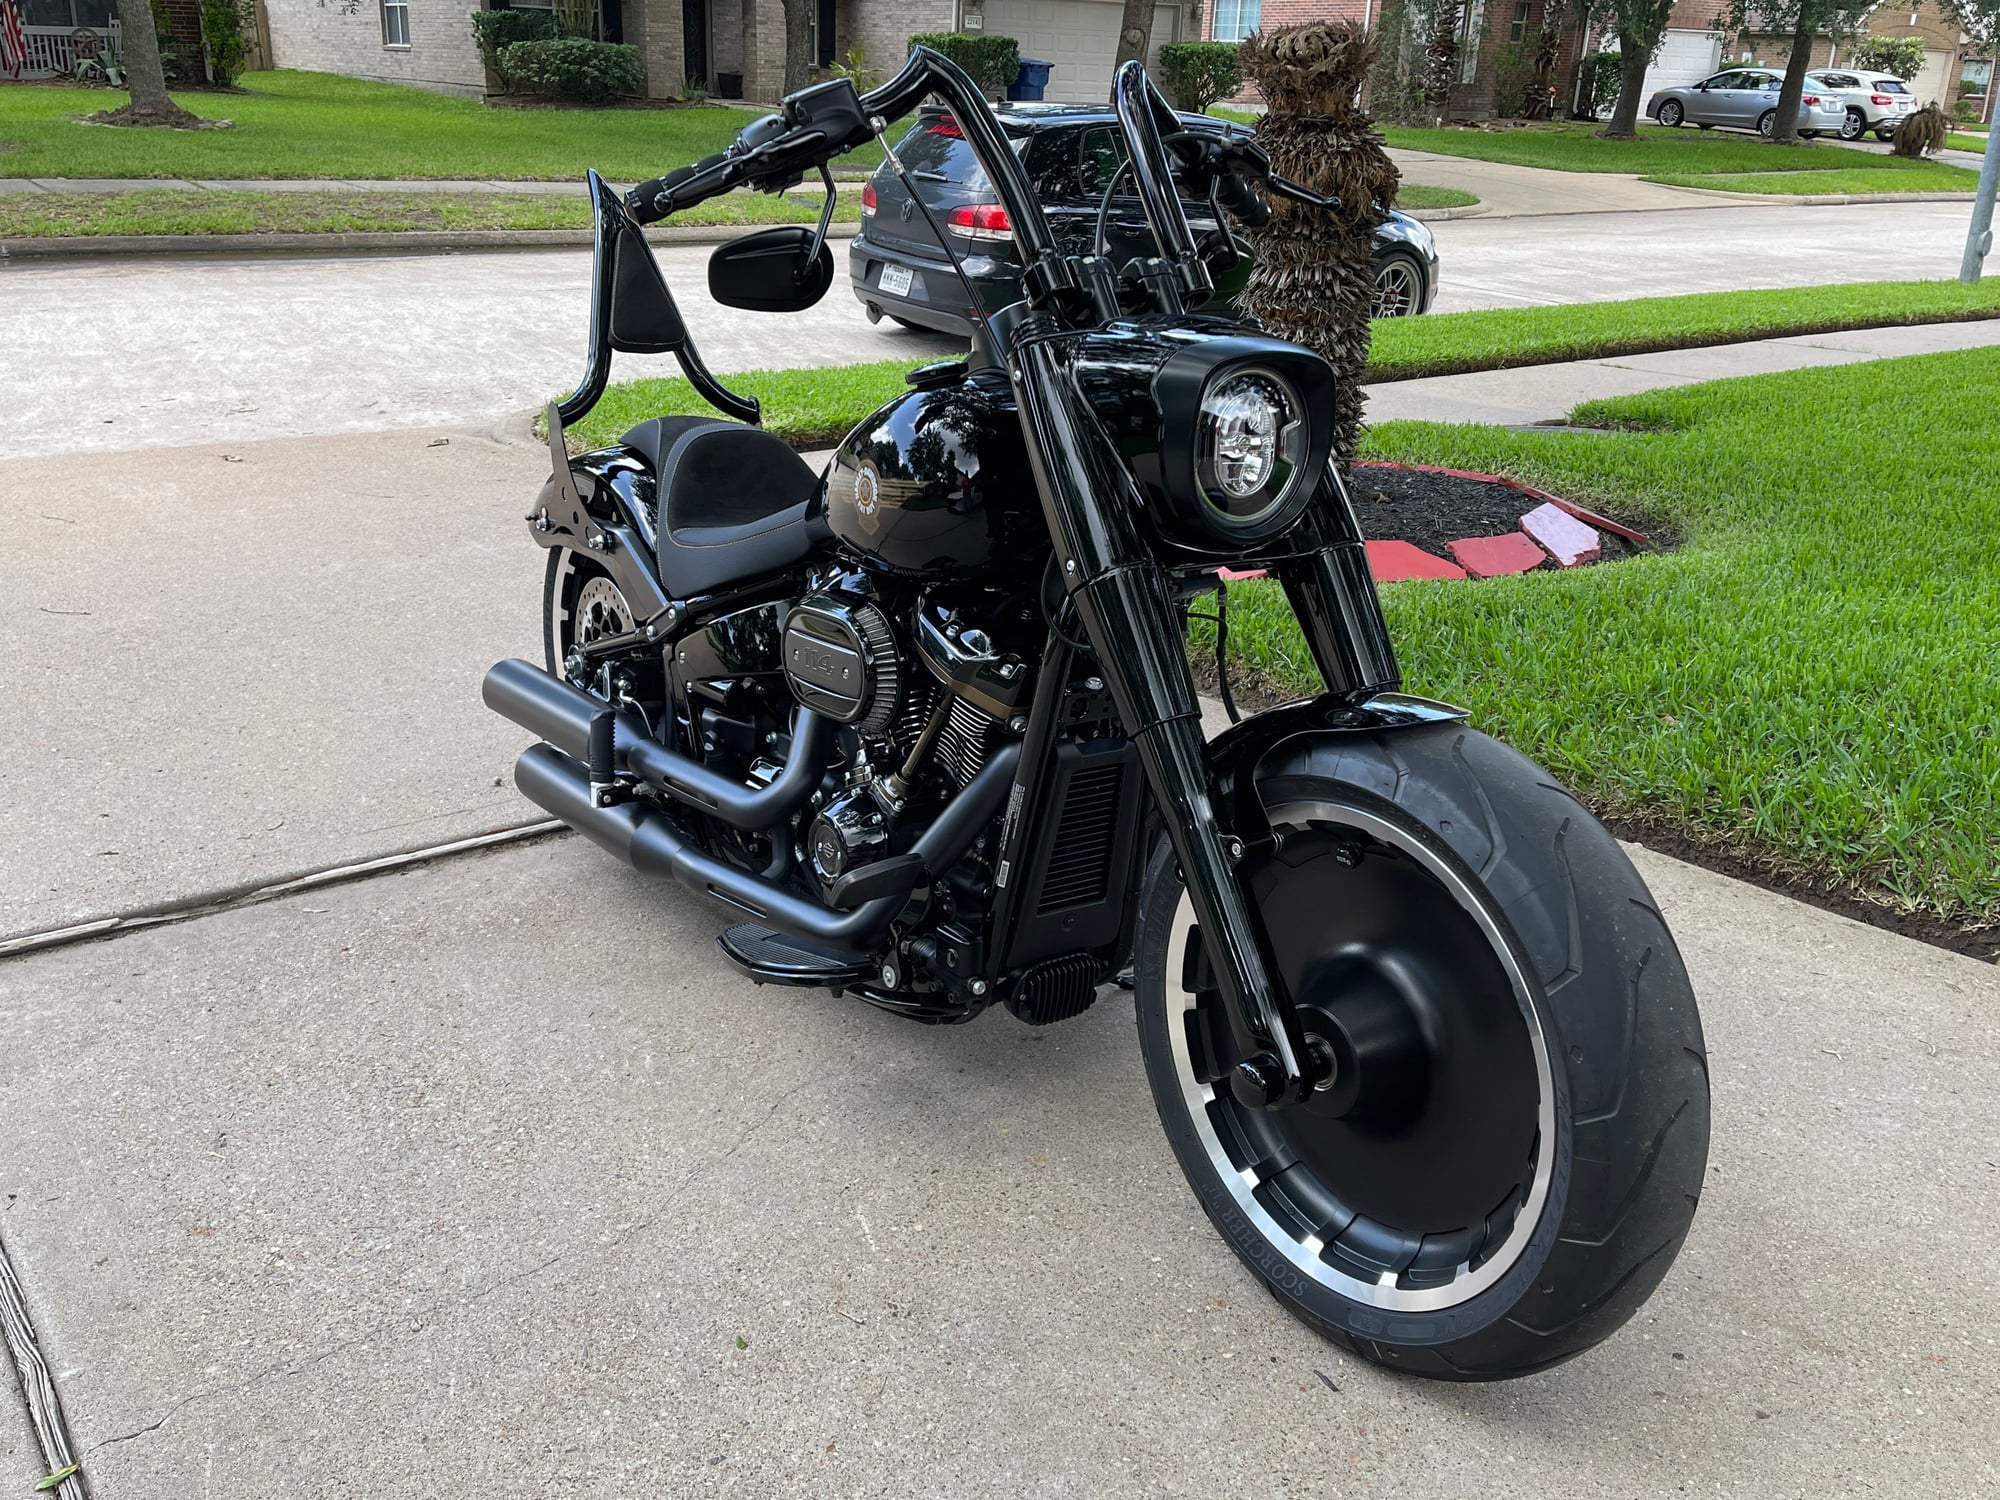 Cleaning FatBoy Wheels-18' and up models - Harley Davidson Forums